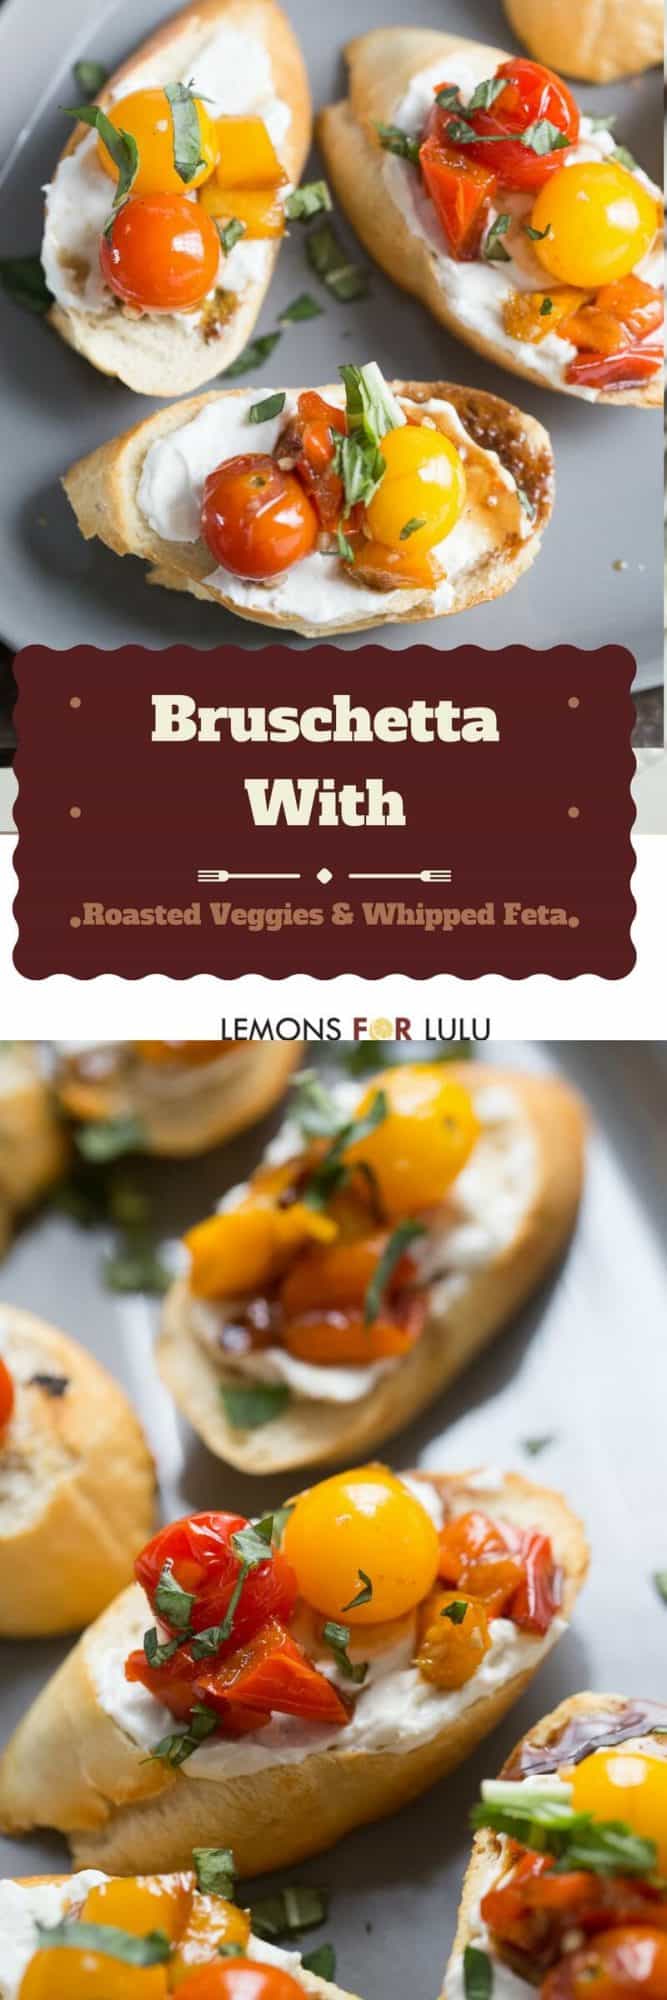 Finger foods and appetizers are loved by all. Serve up this flavorful and vibrant bruschetta with roasted veggies; they are sure to impress!